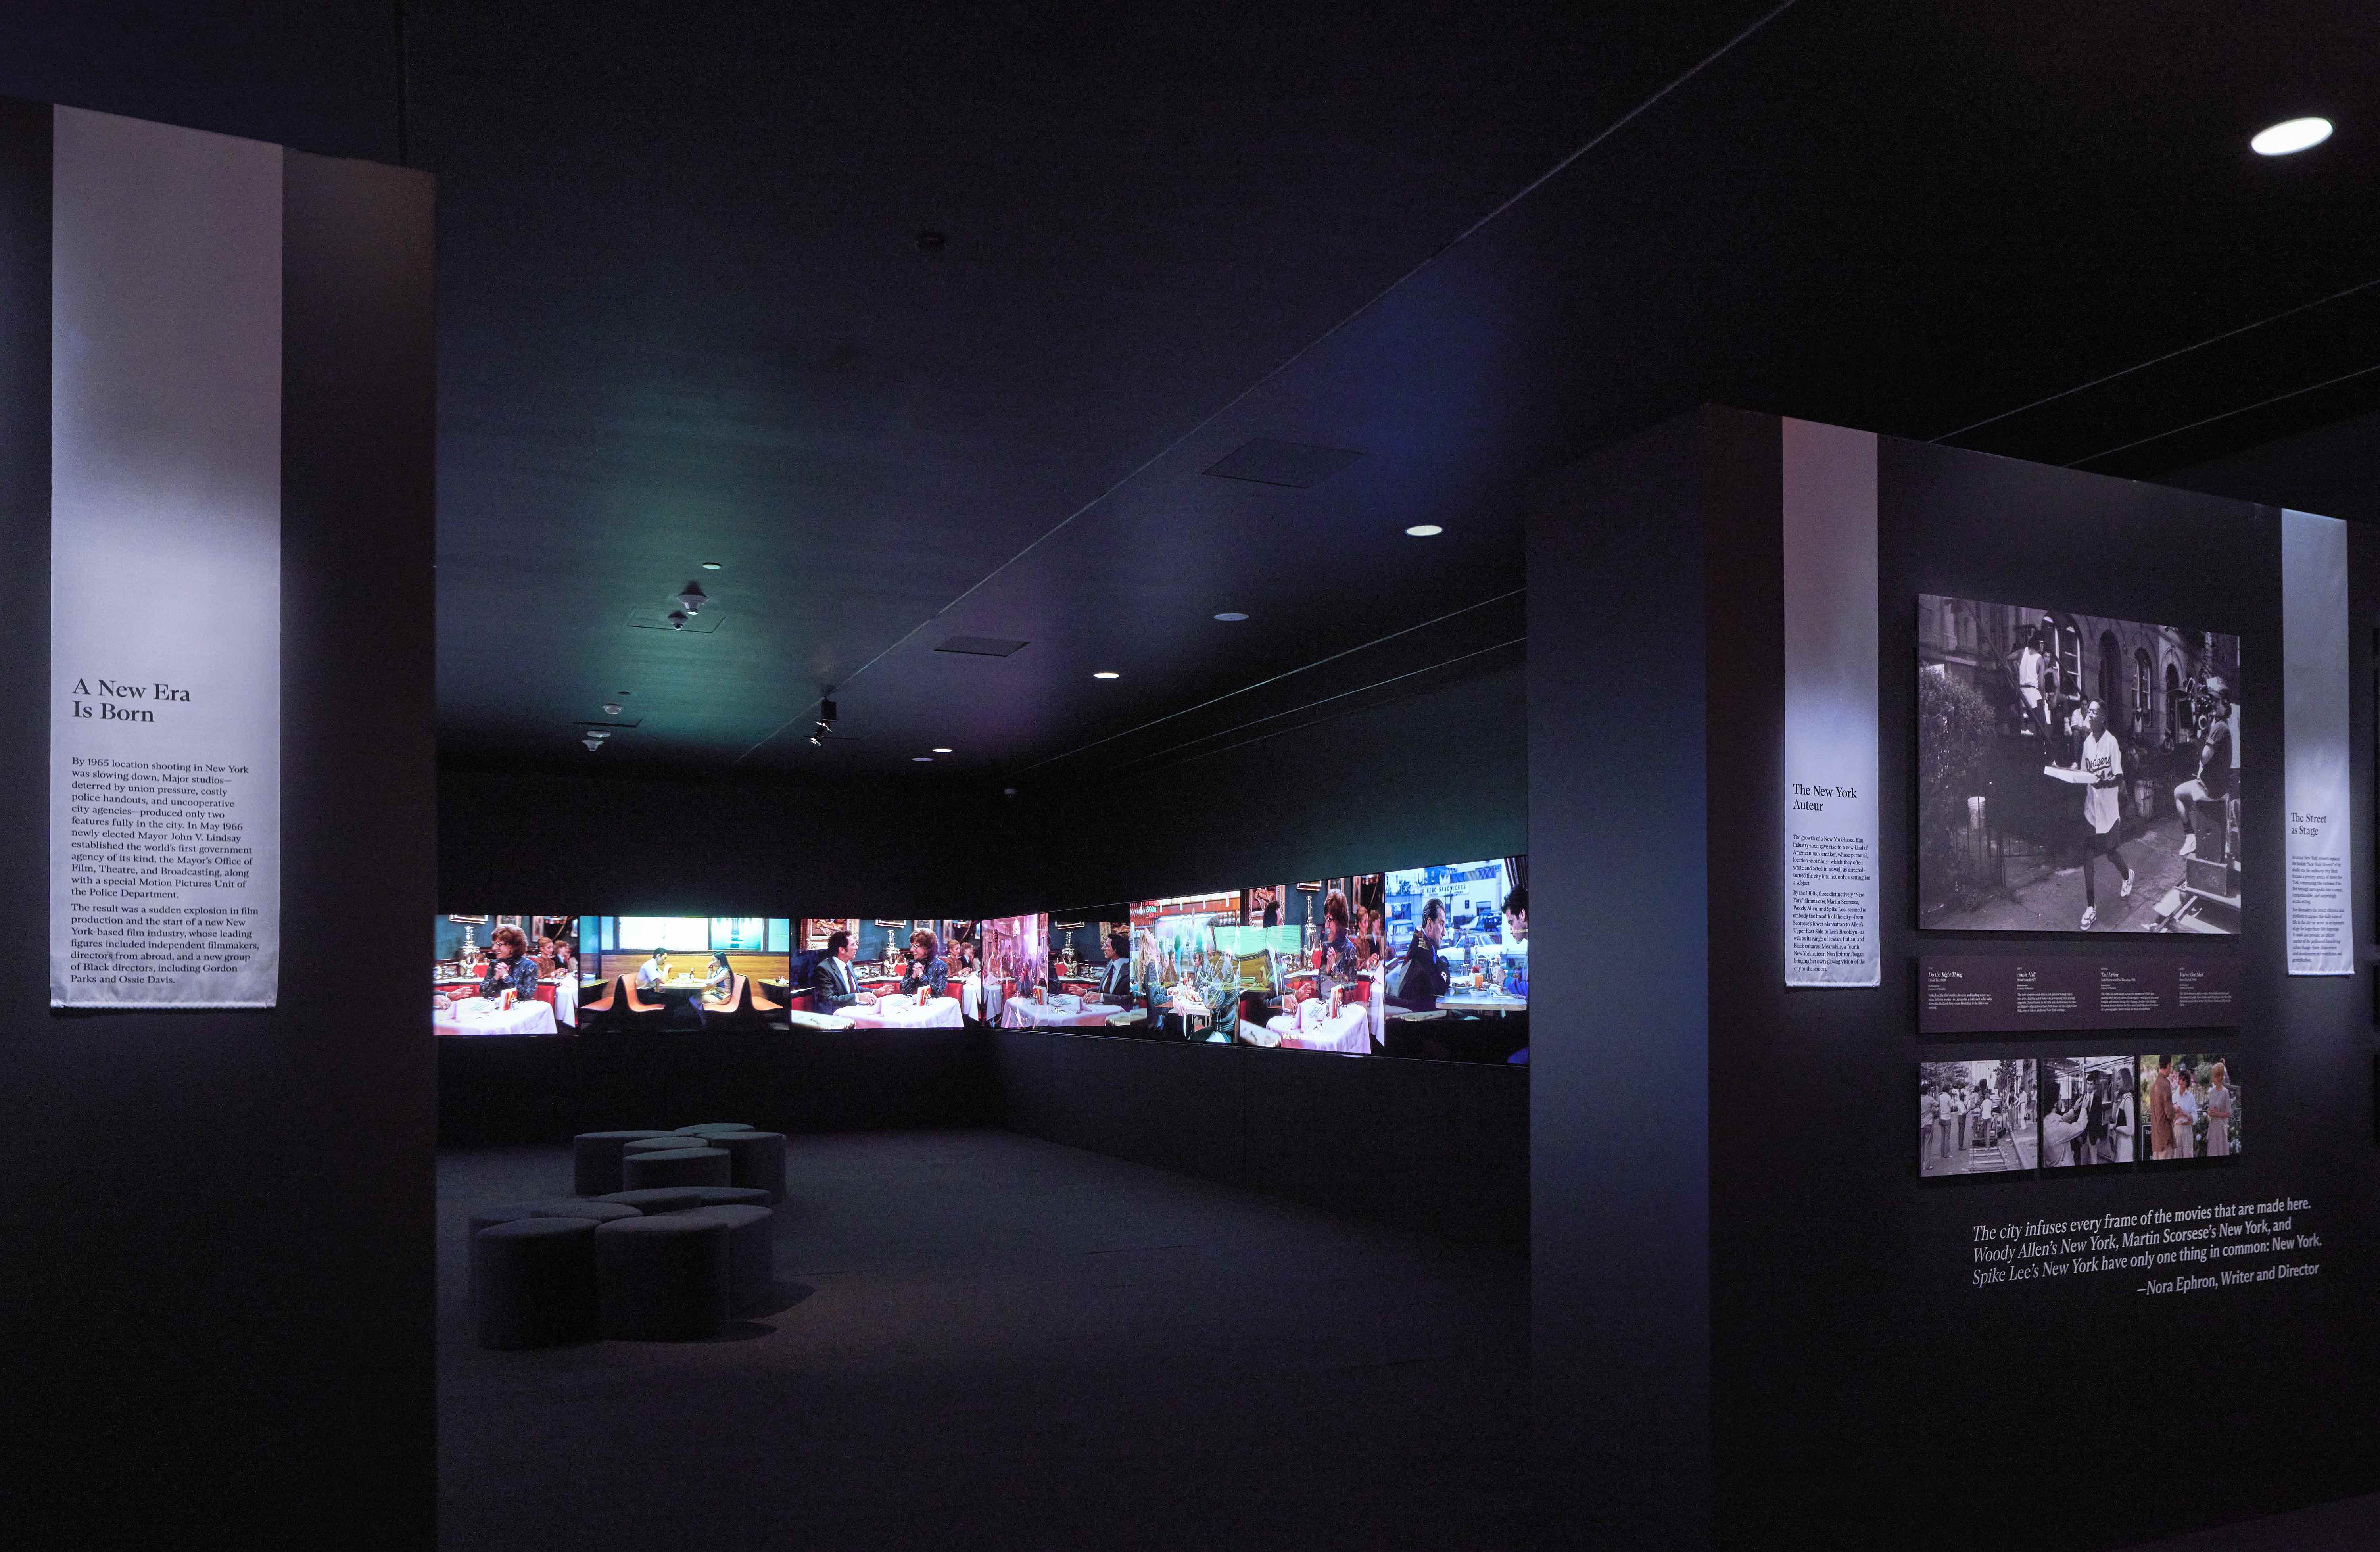 A dark room with several large screens. 